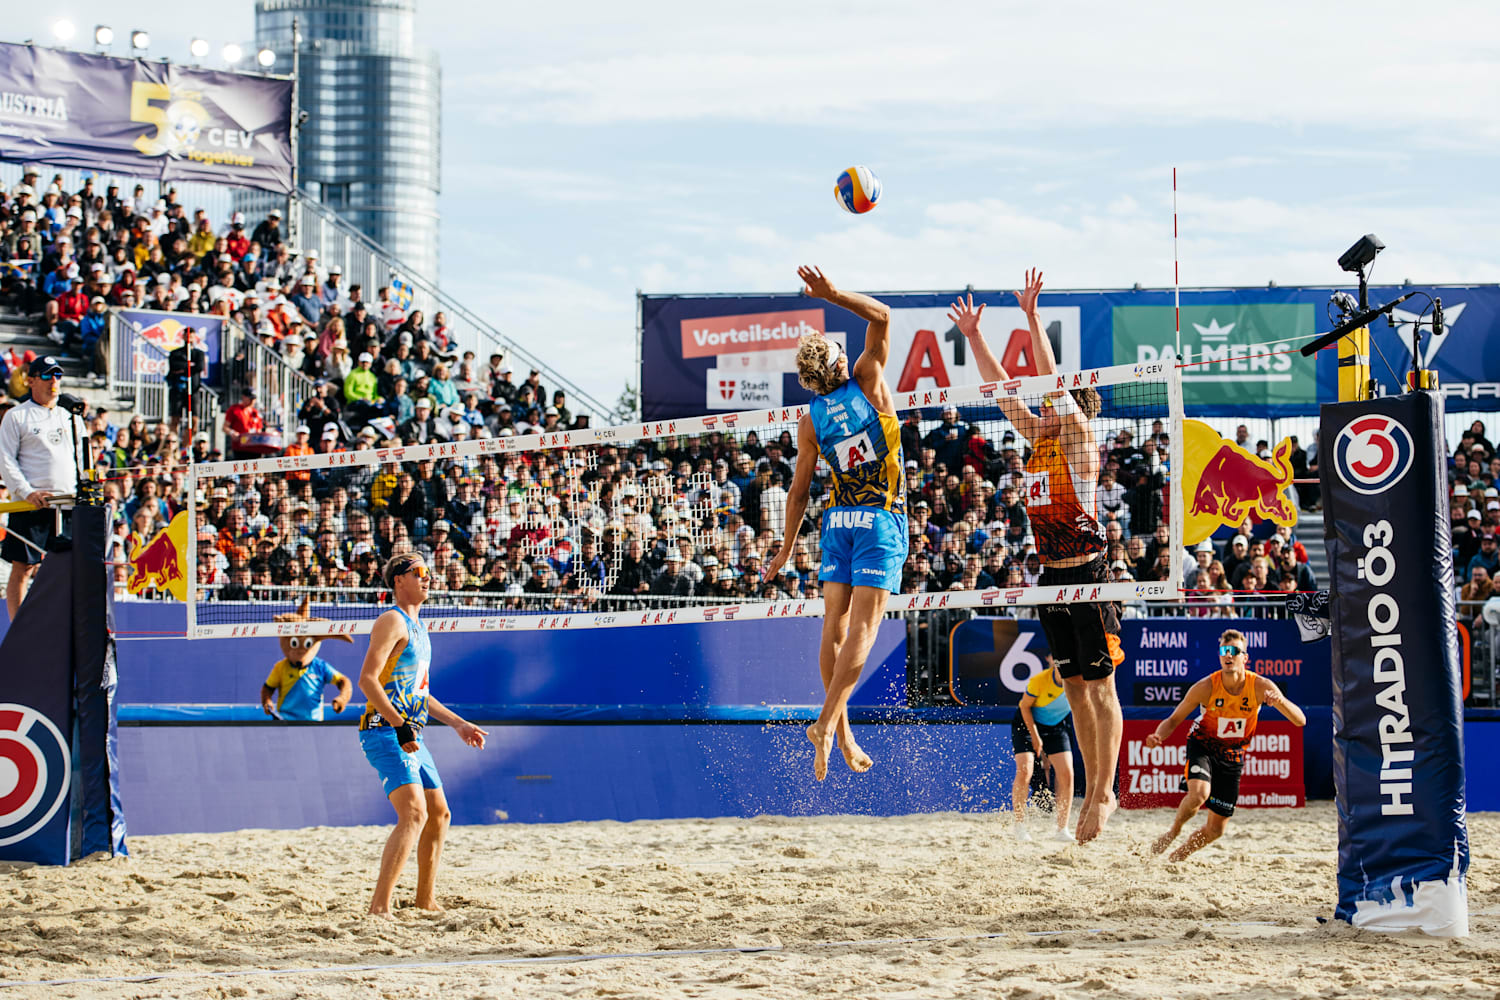 Beach volleyball: 5 back-to-basic tips